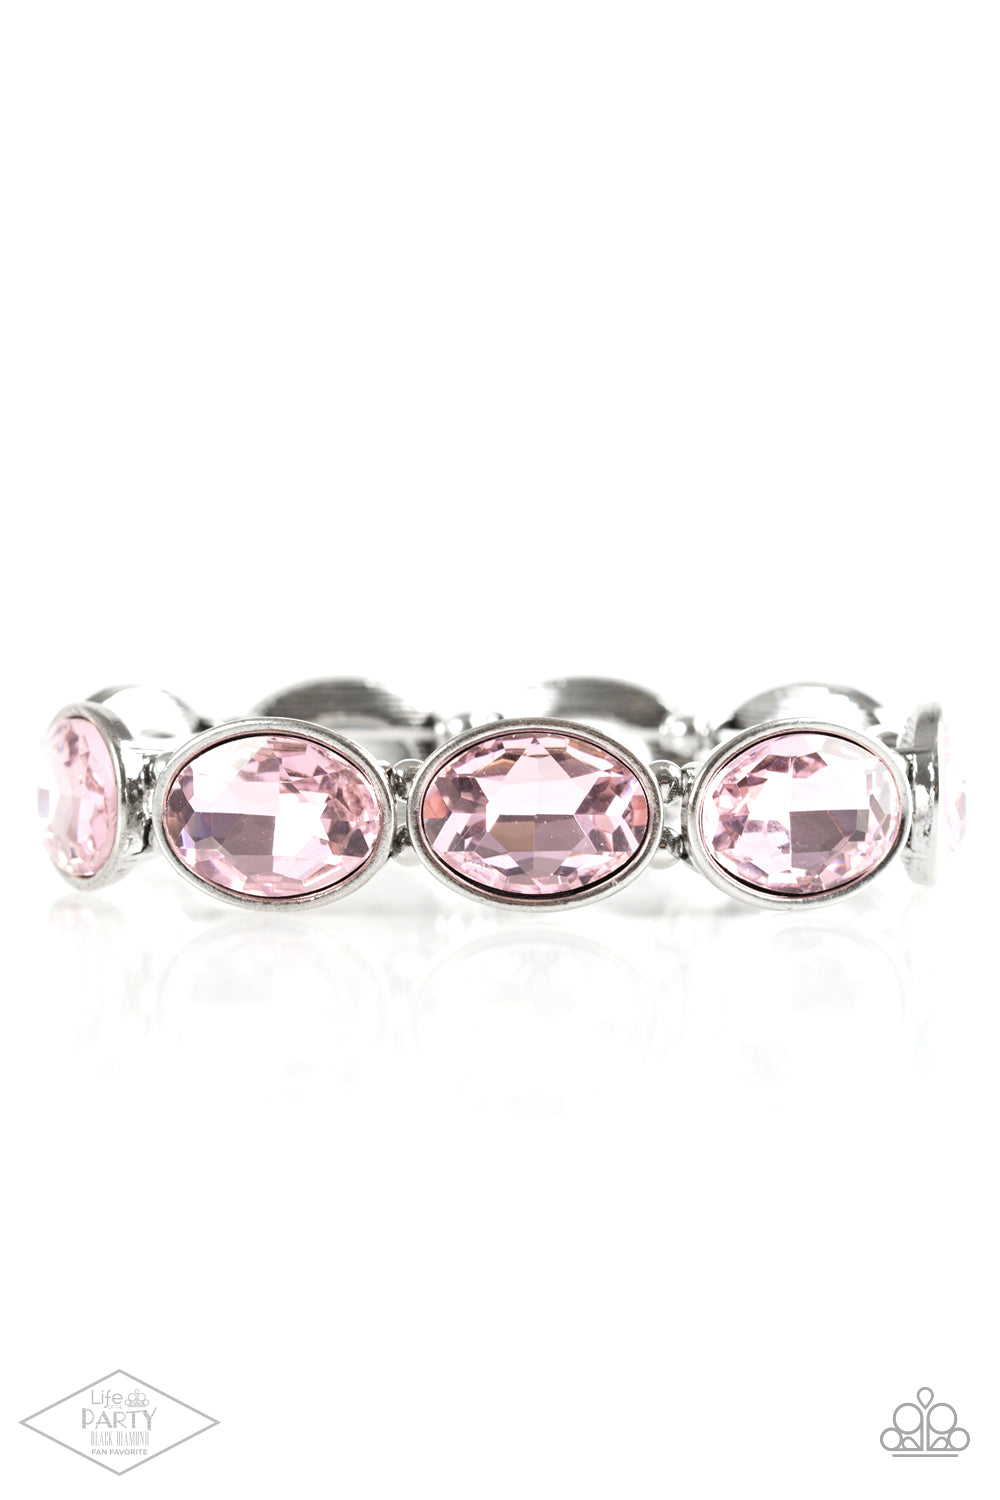 Paparazzi DIVA In Disguise - Pink Bracelet - Life of the Party Black Diamond - A Finishing Touch Jewelry